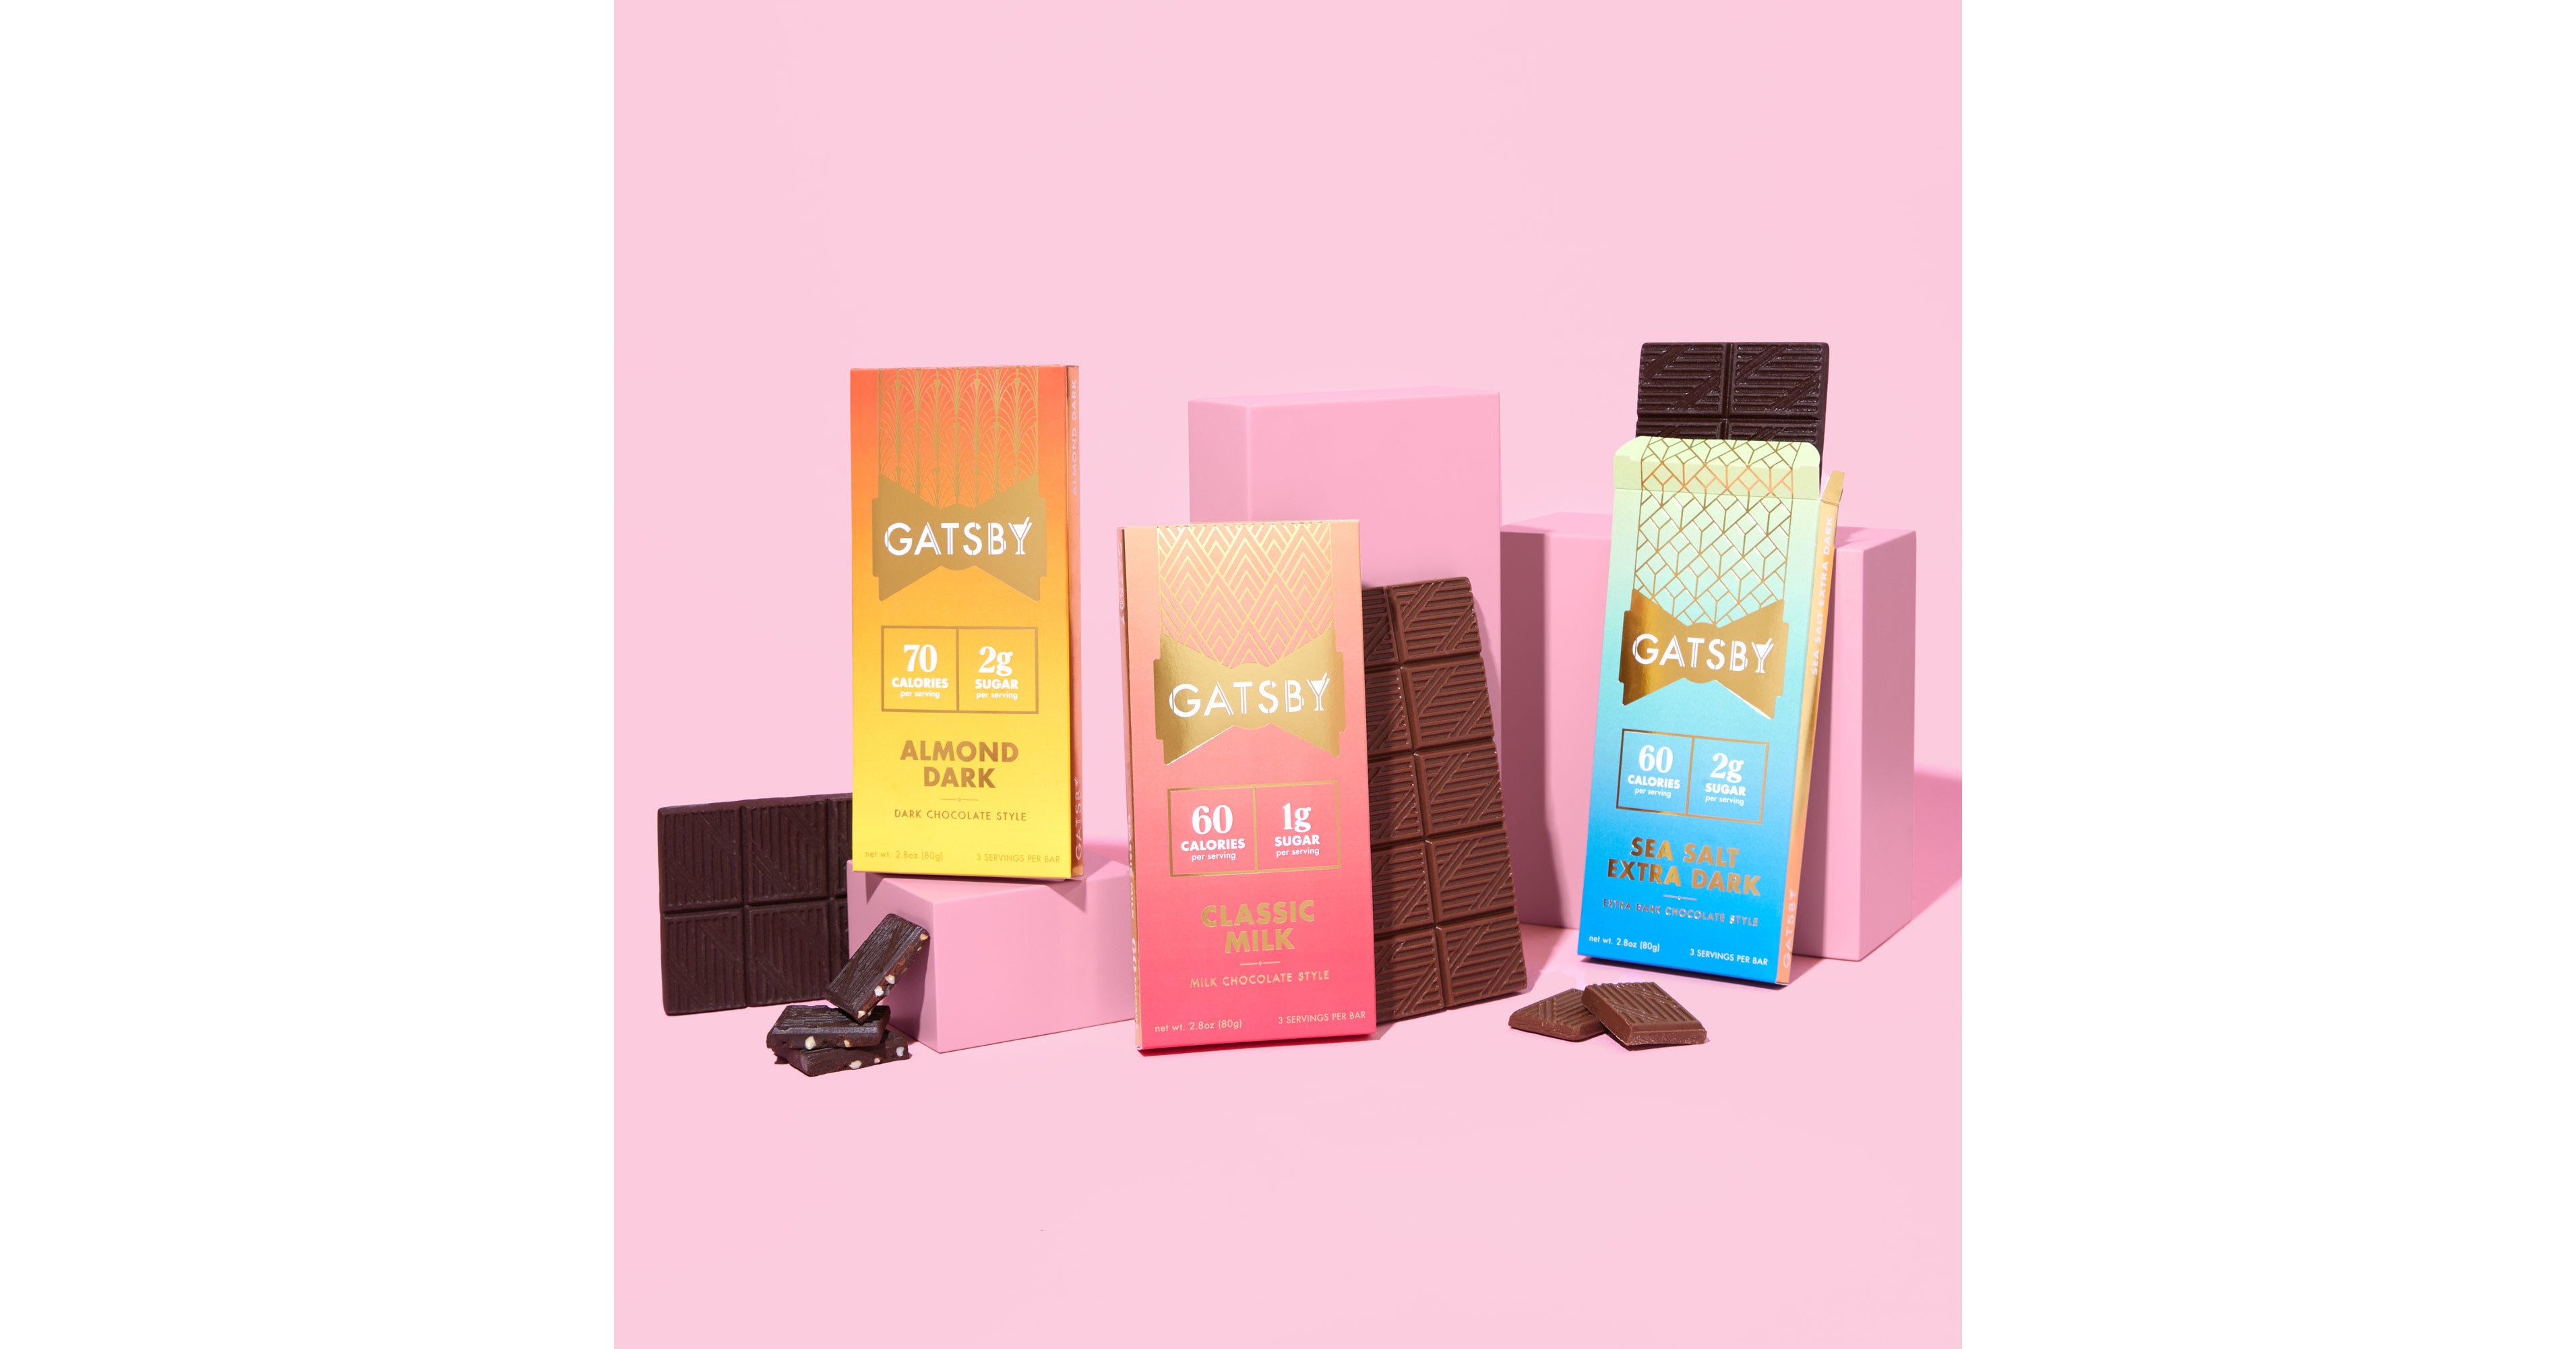 GATSBY is Launching a Game-Changing Line of Peanut Butter Cups and Decadent  Chocolate Bars--All for a Fraction of the Calories and Sugar